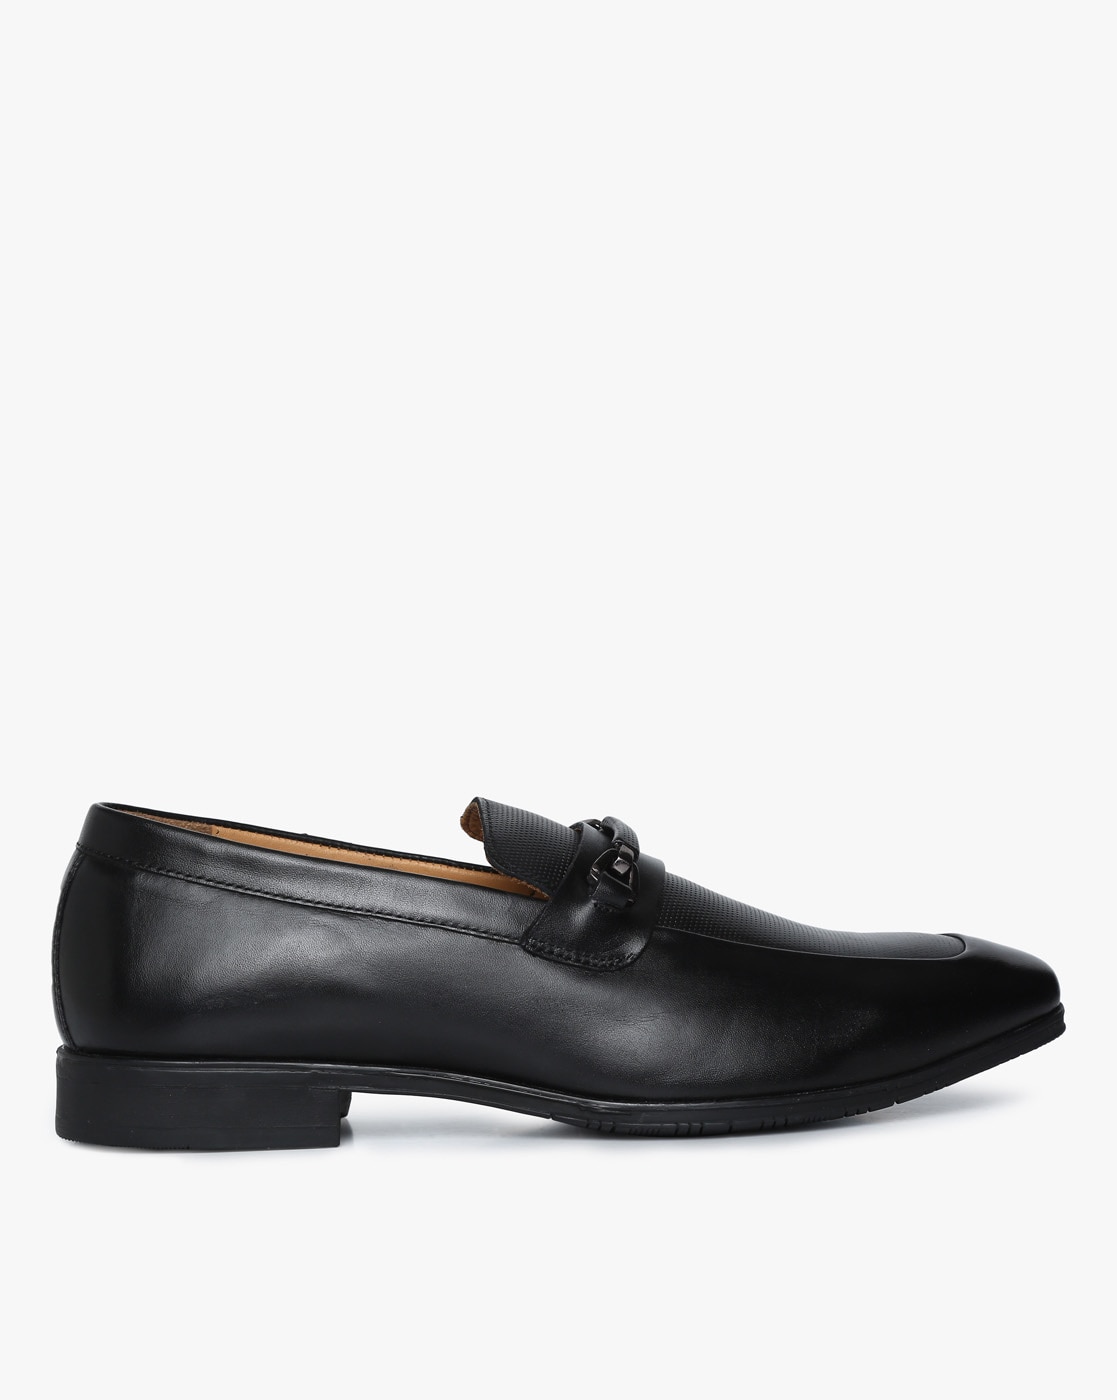 louis philippe slip on shoes